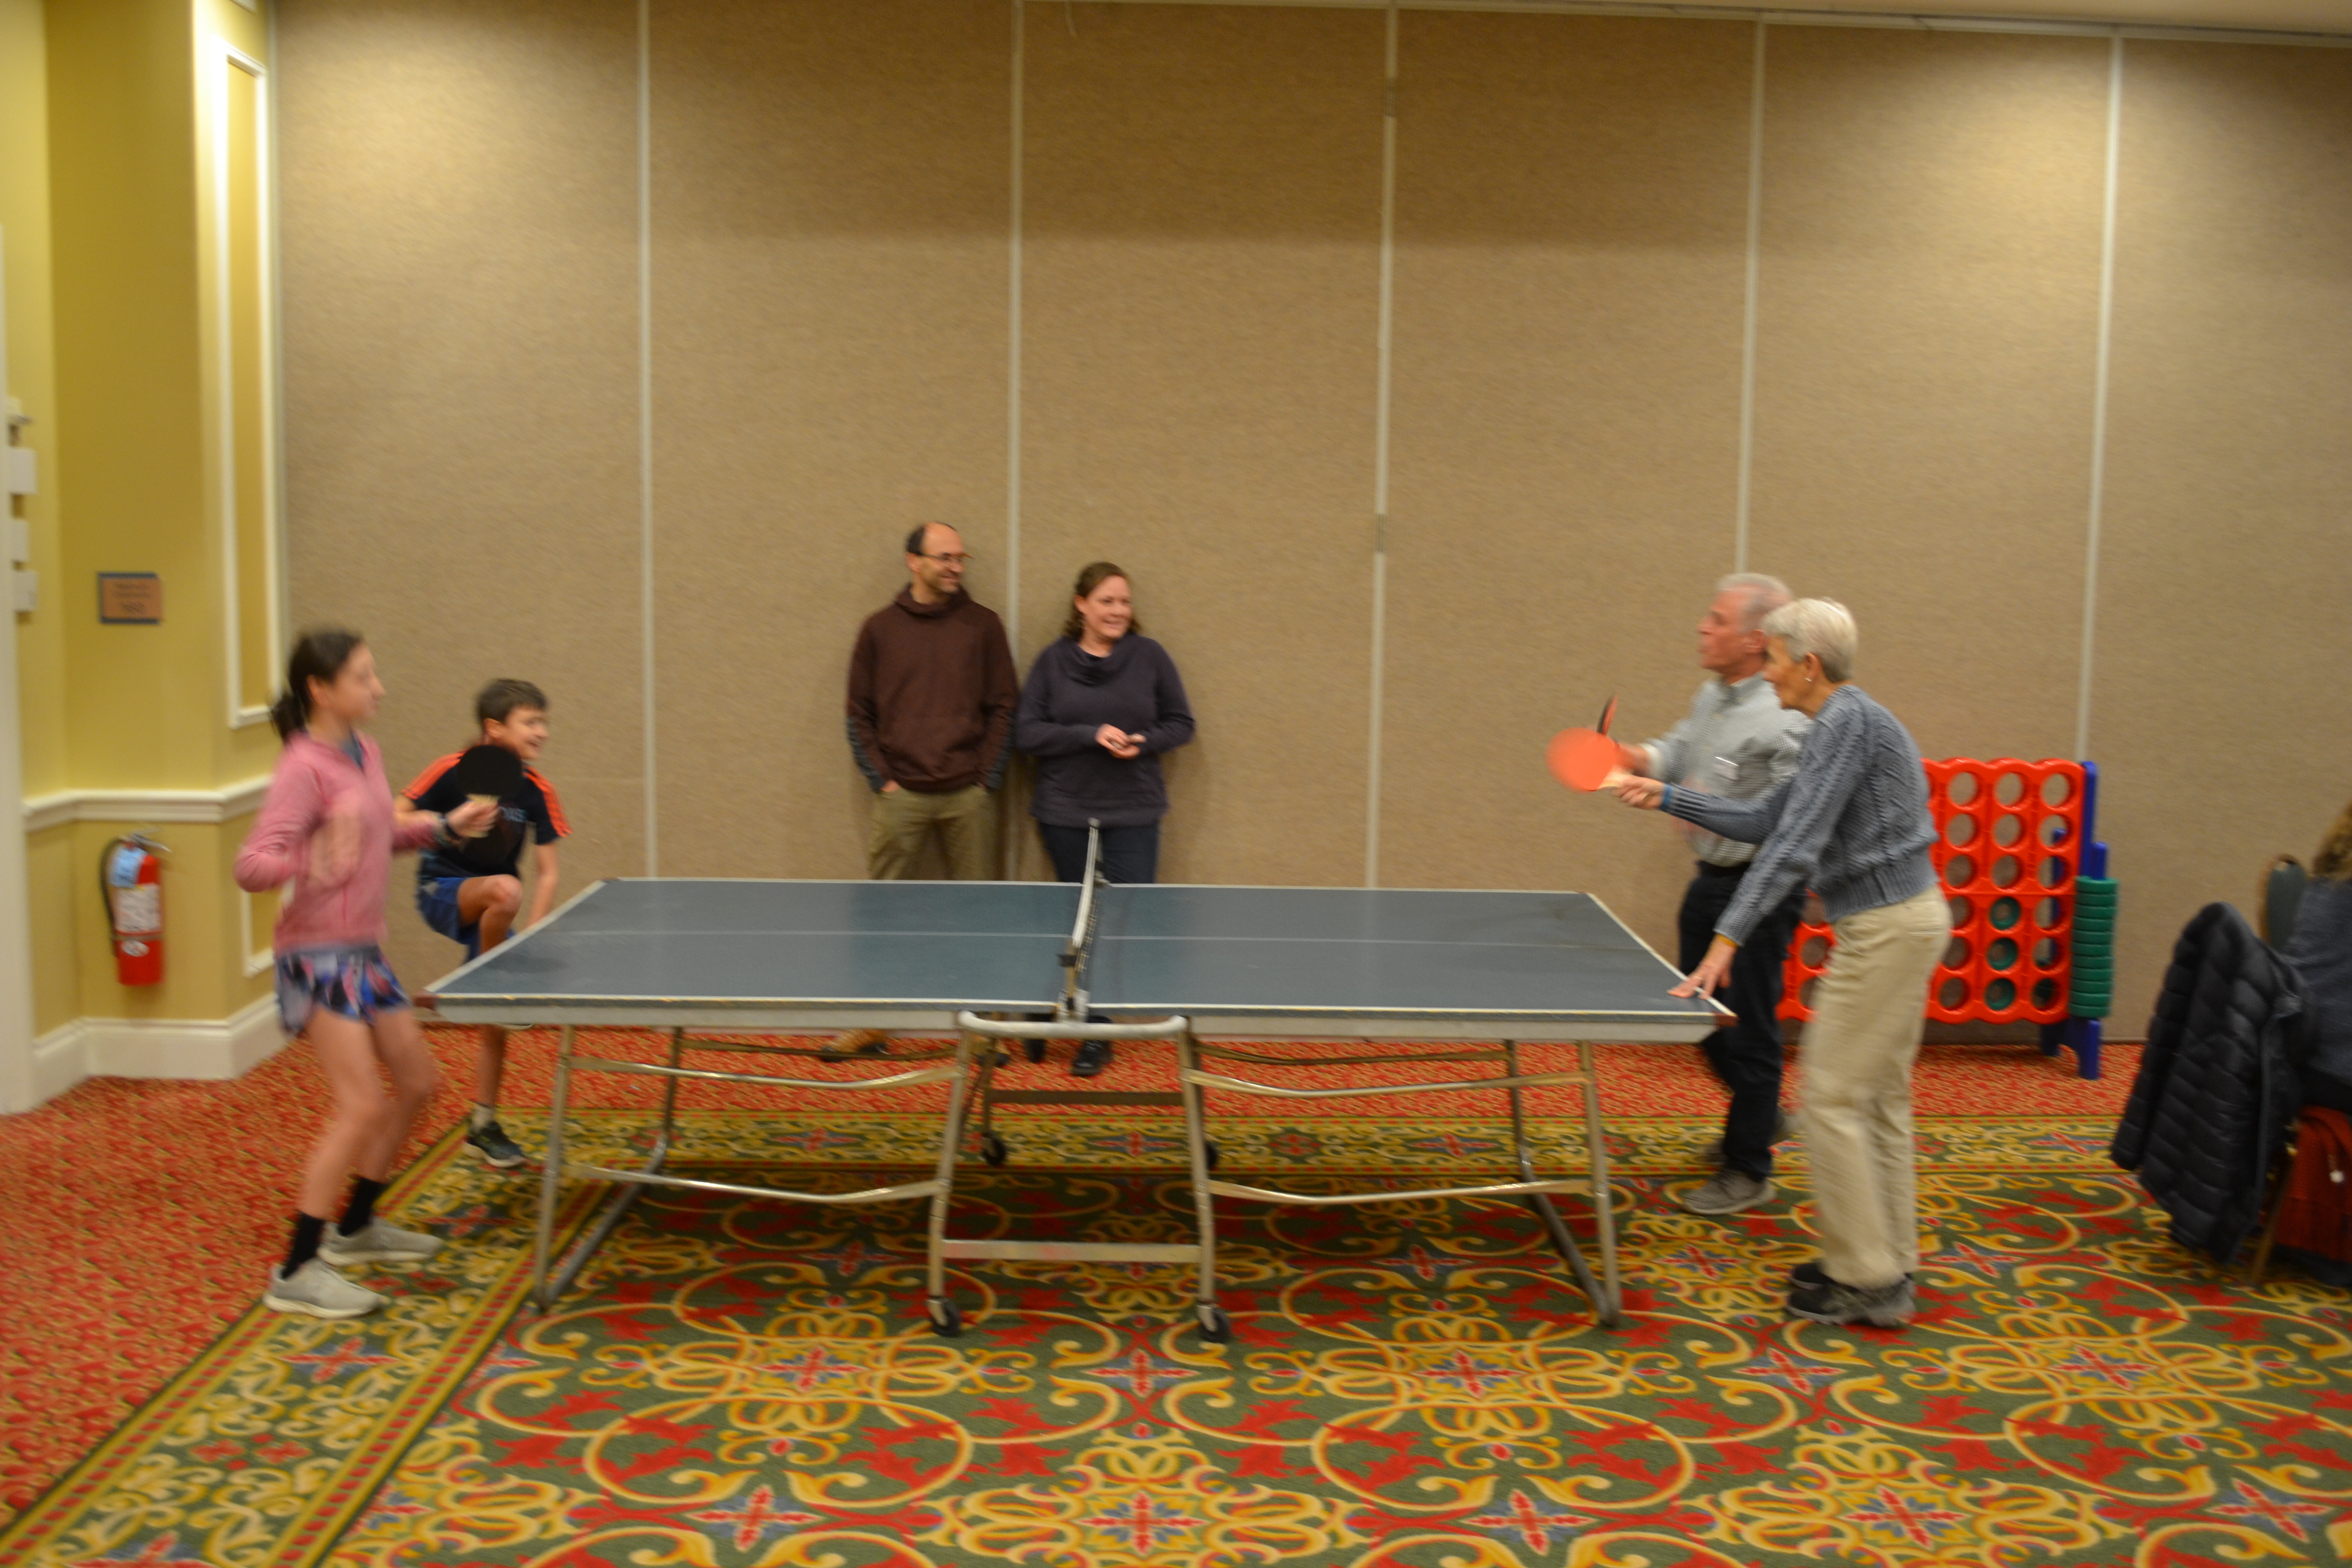 Drs. Youth and Talbot taking on the kids in ping pong!